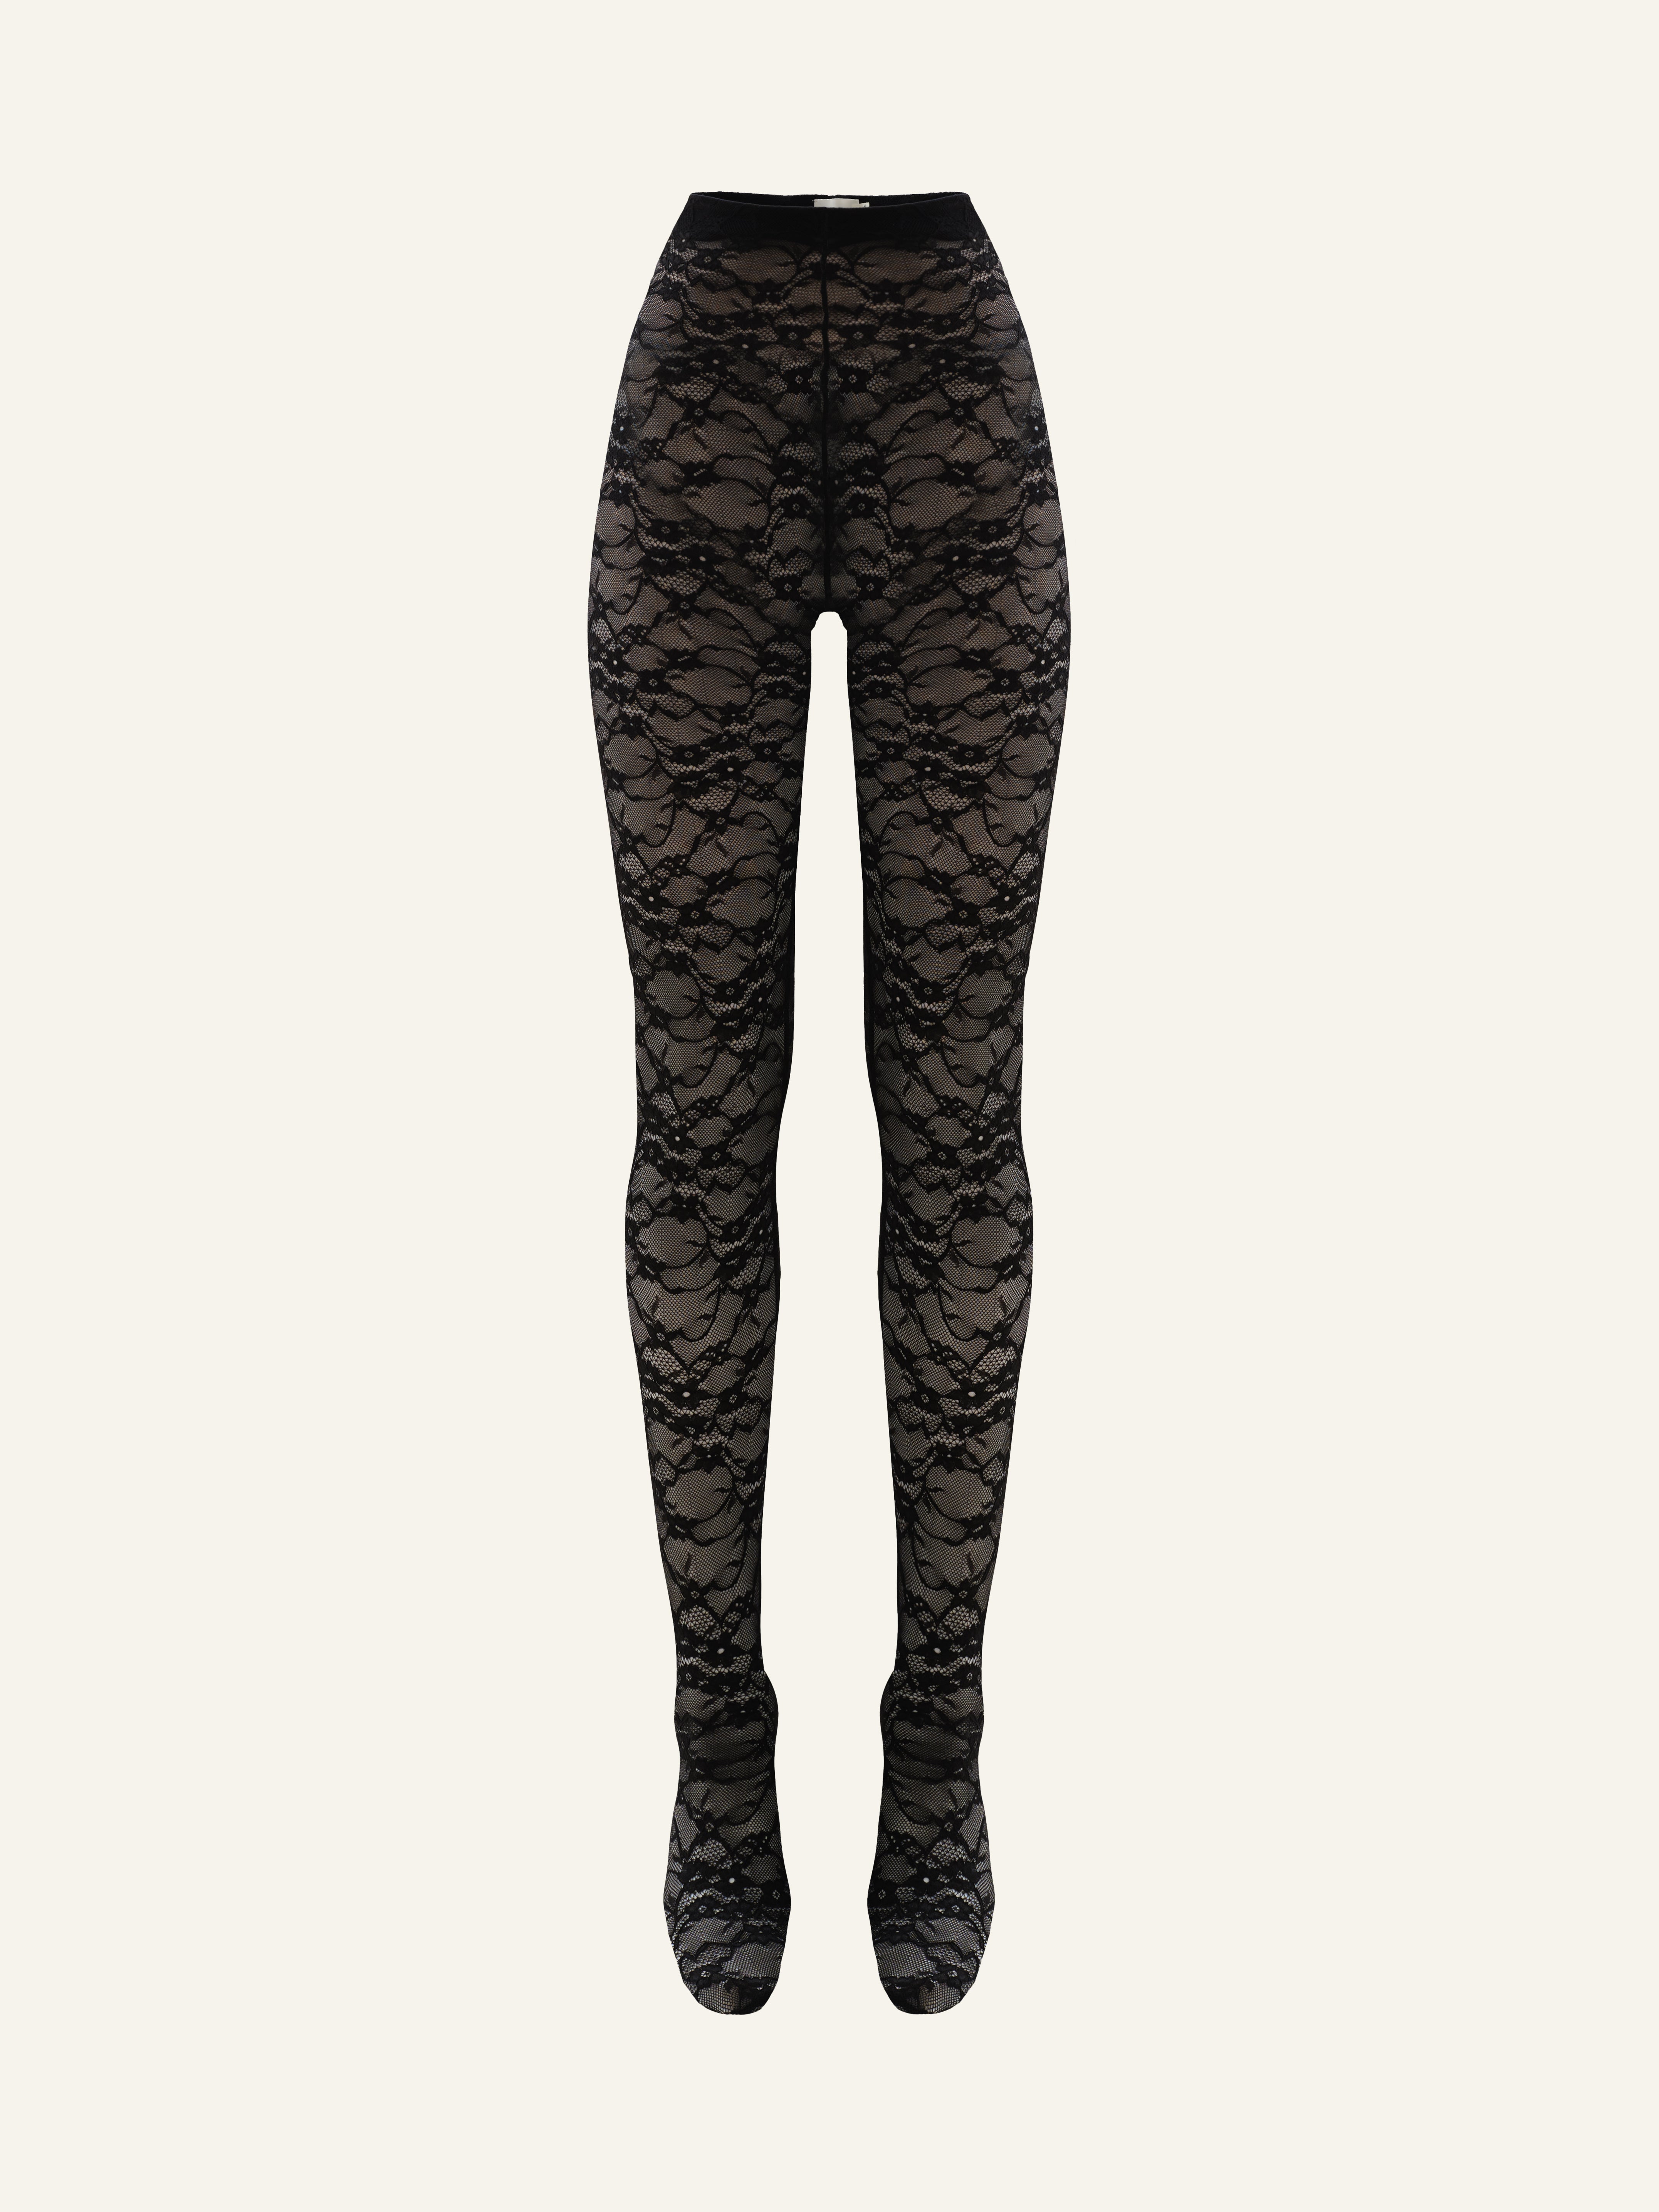 Product photo of black lace high rise leggings